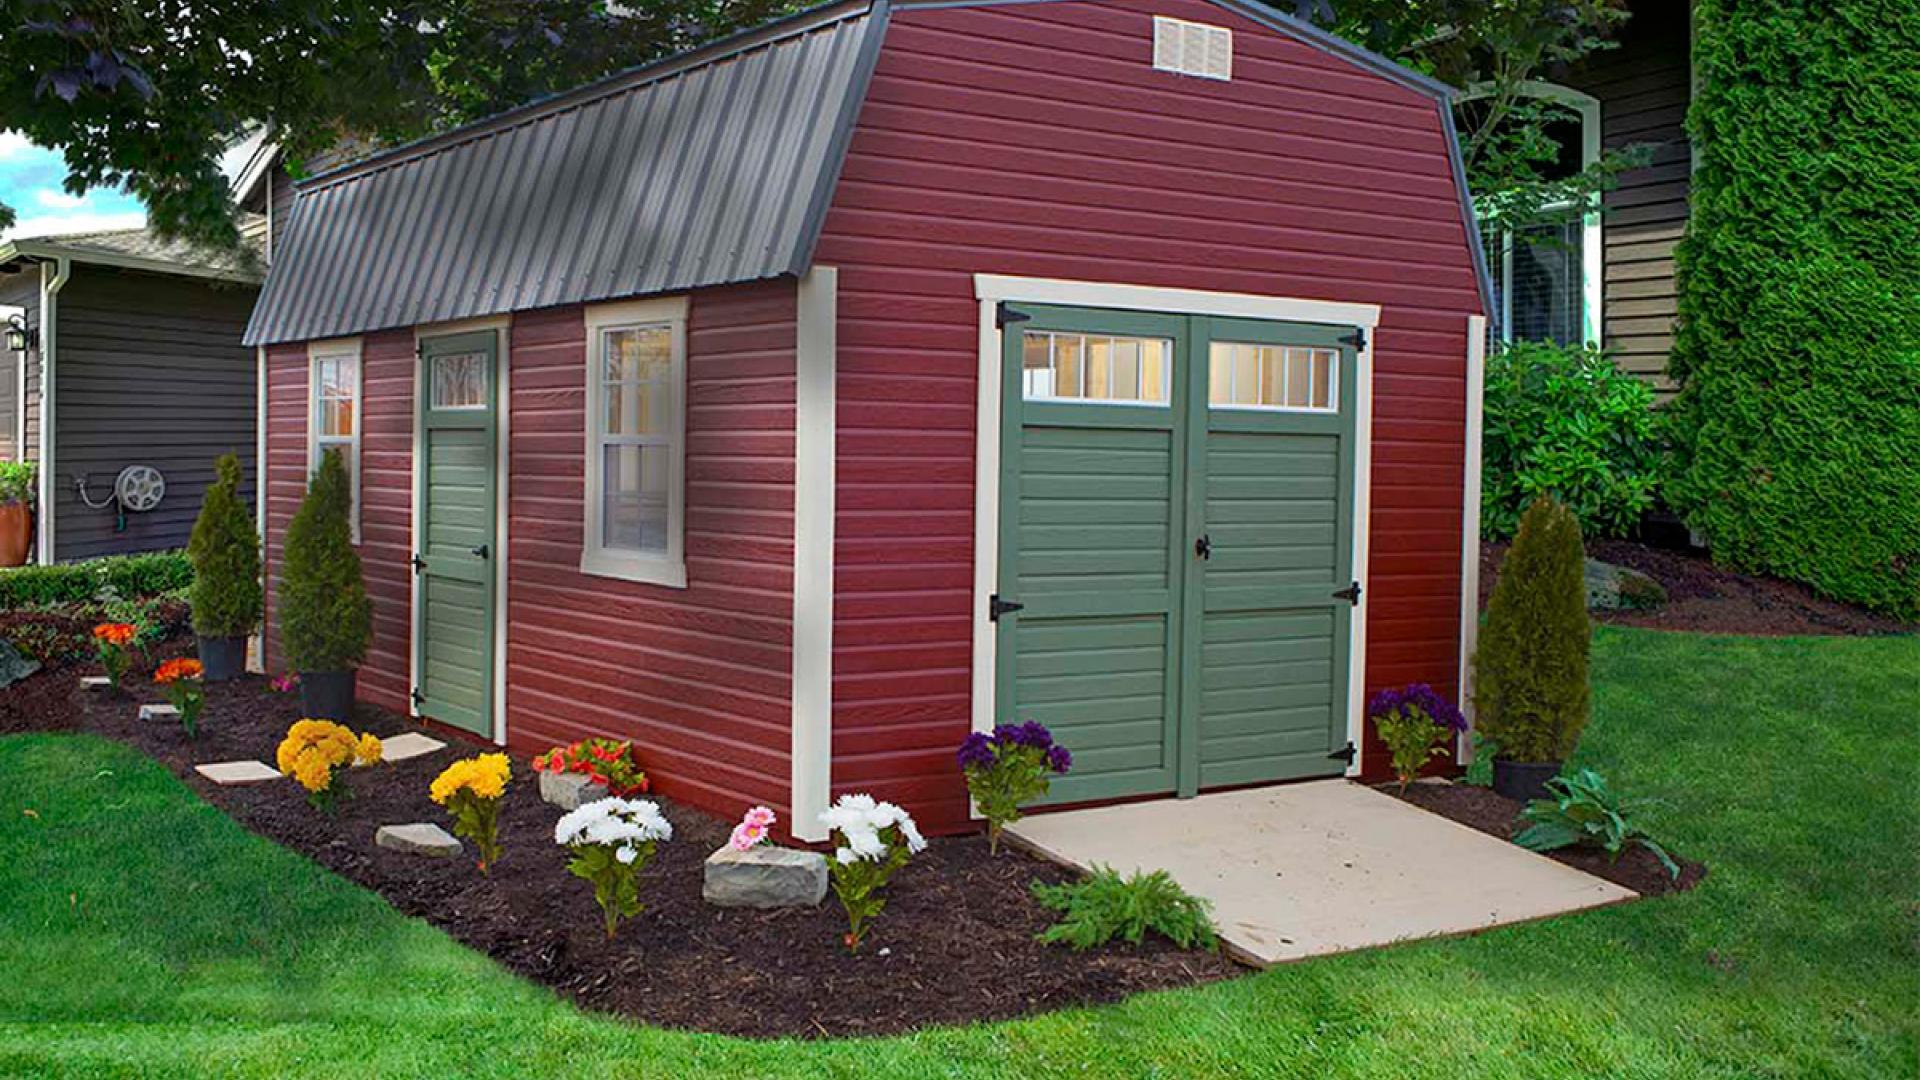 High barn with red siding, white trim, green double doors, windows, a green single door, and a metal roof sitting in a backyard.